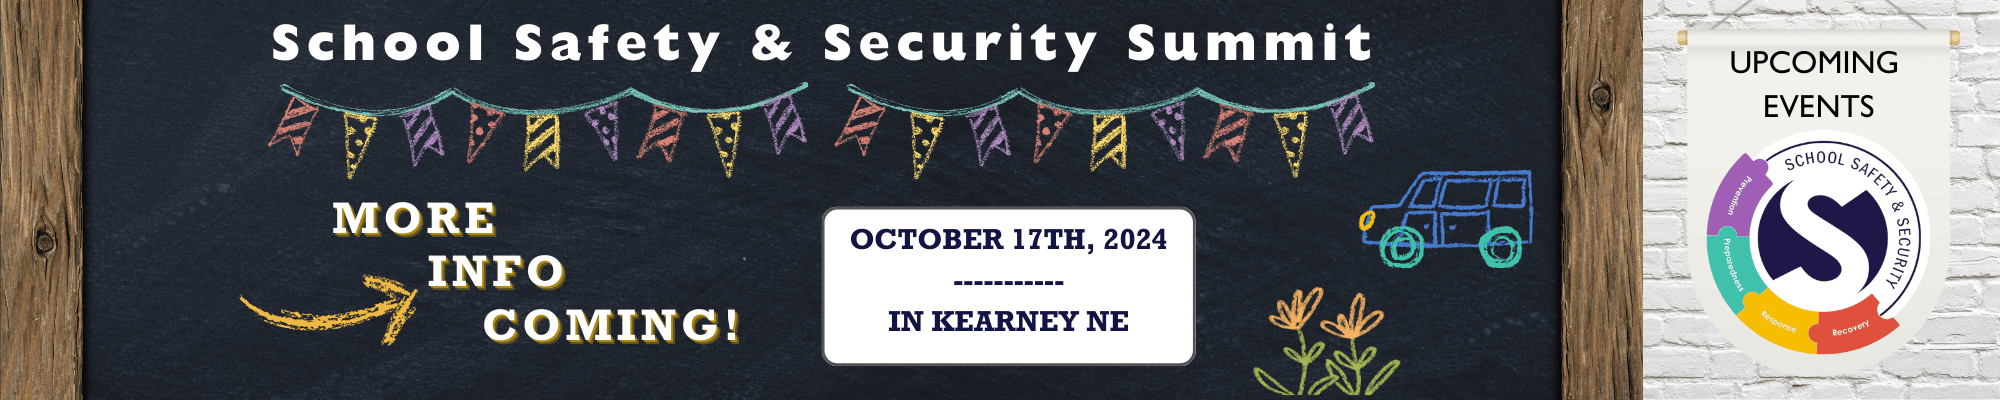 upcoming events save that date for School Safety and Security Summit 10/17/2024. more info is coming soon. Link to school safety event page. 